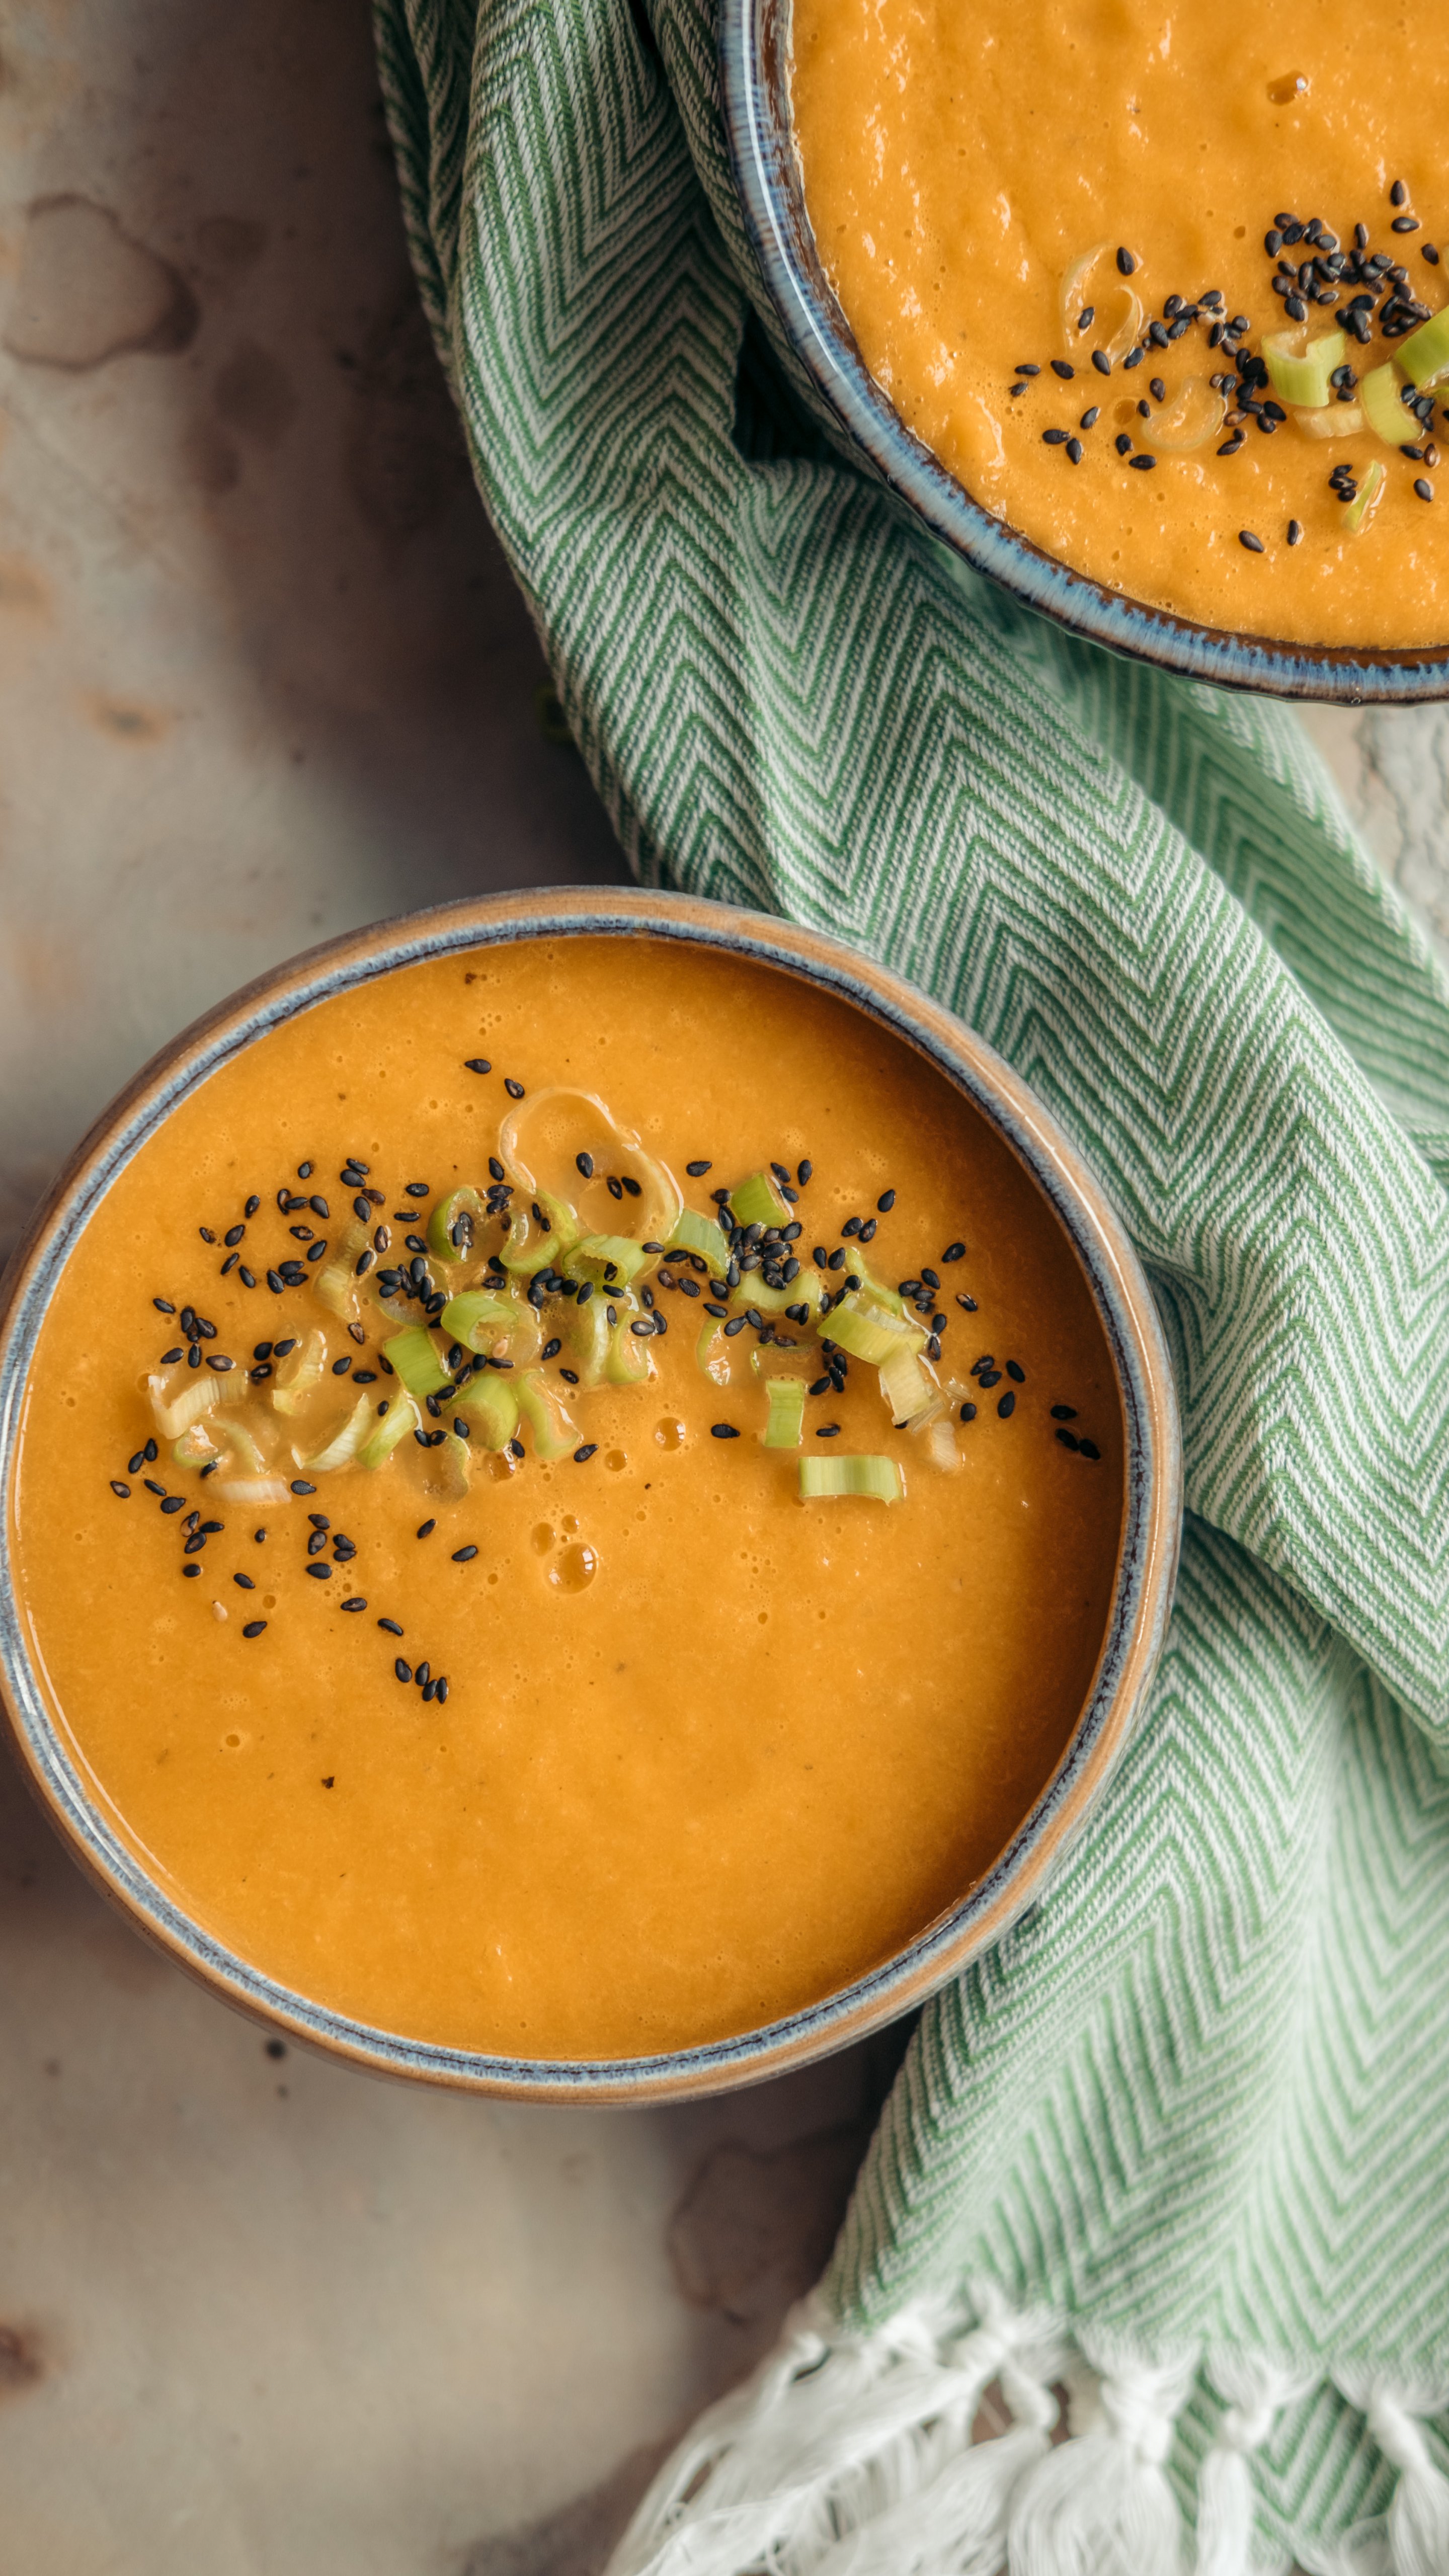 https://www.yuzubakes.com/sites/yuzubakes.com/files/styles/yct_crp_po_min_scale_5120/public/featured-images/delicious-carrot-ginger-soup.jpg